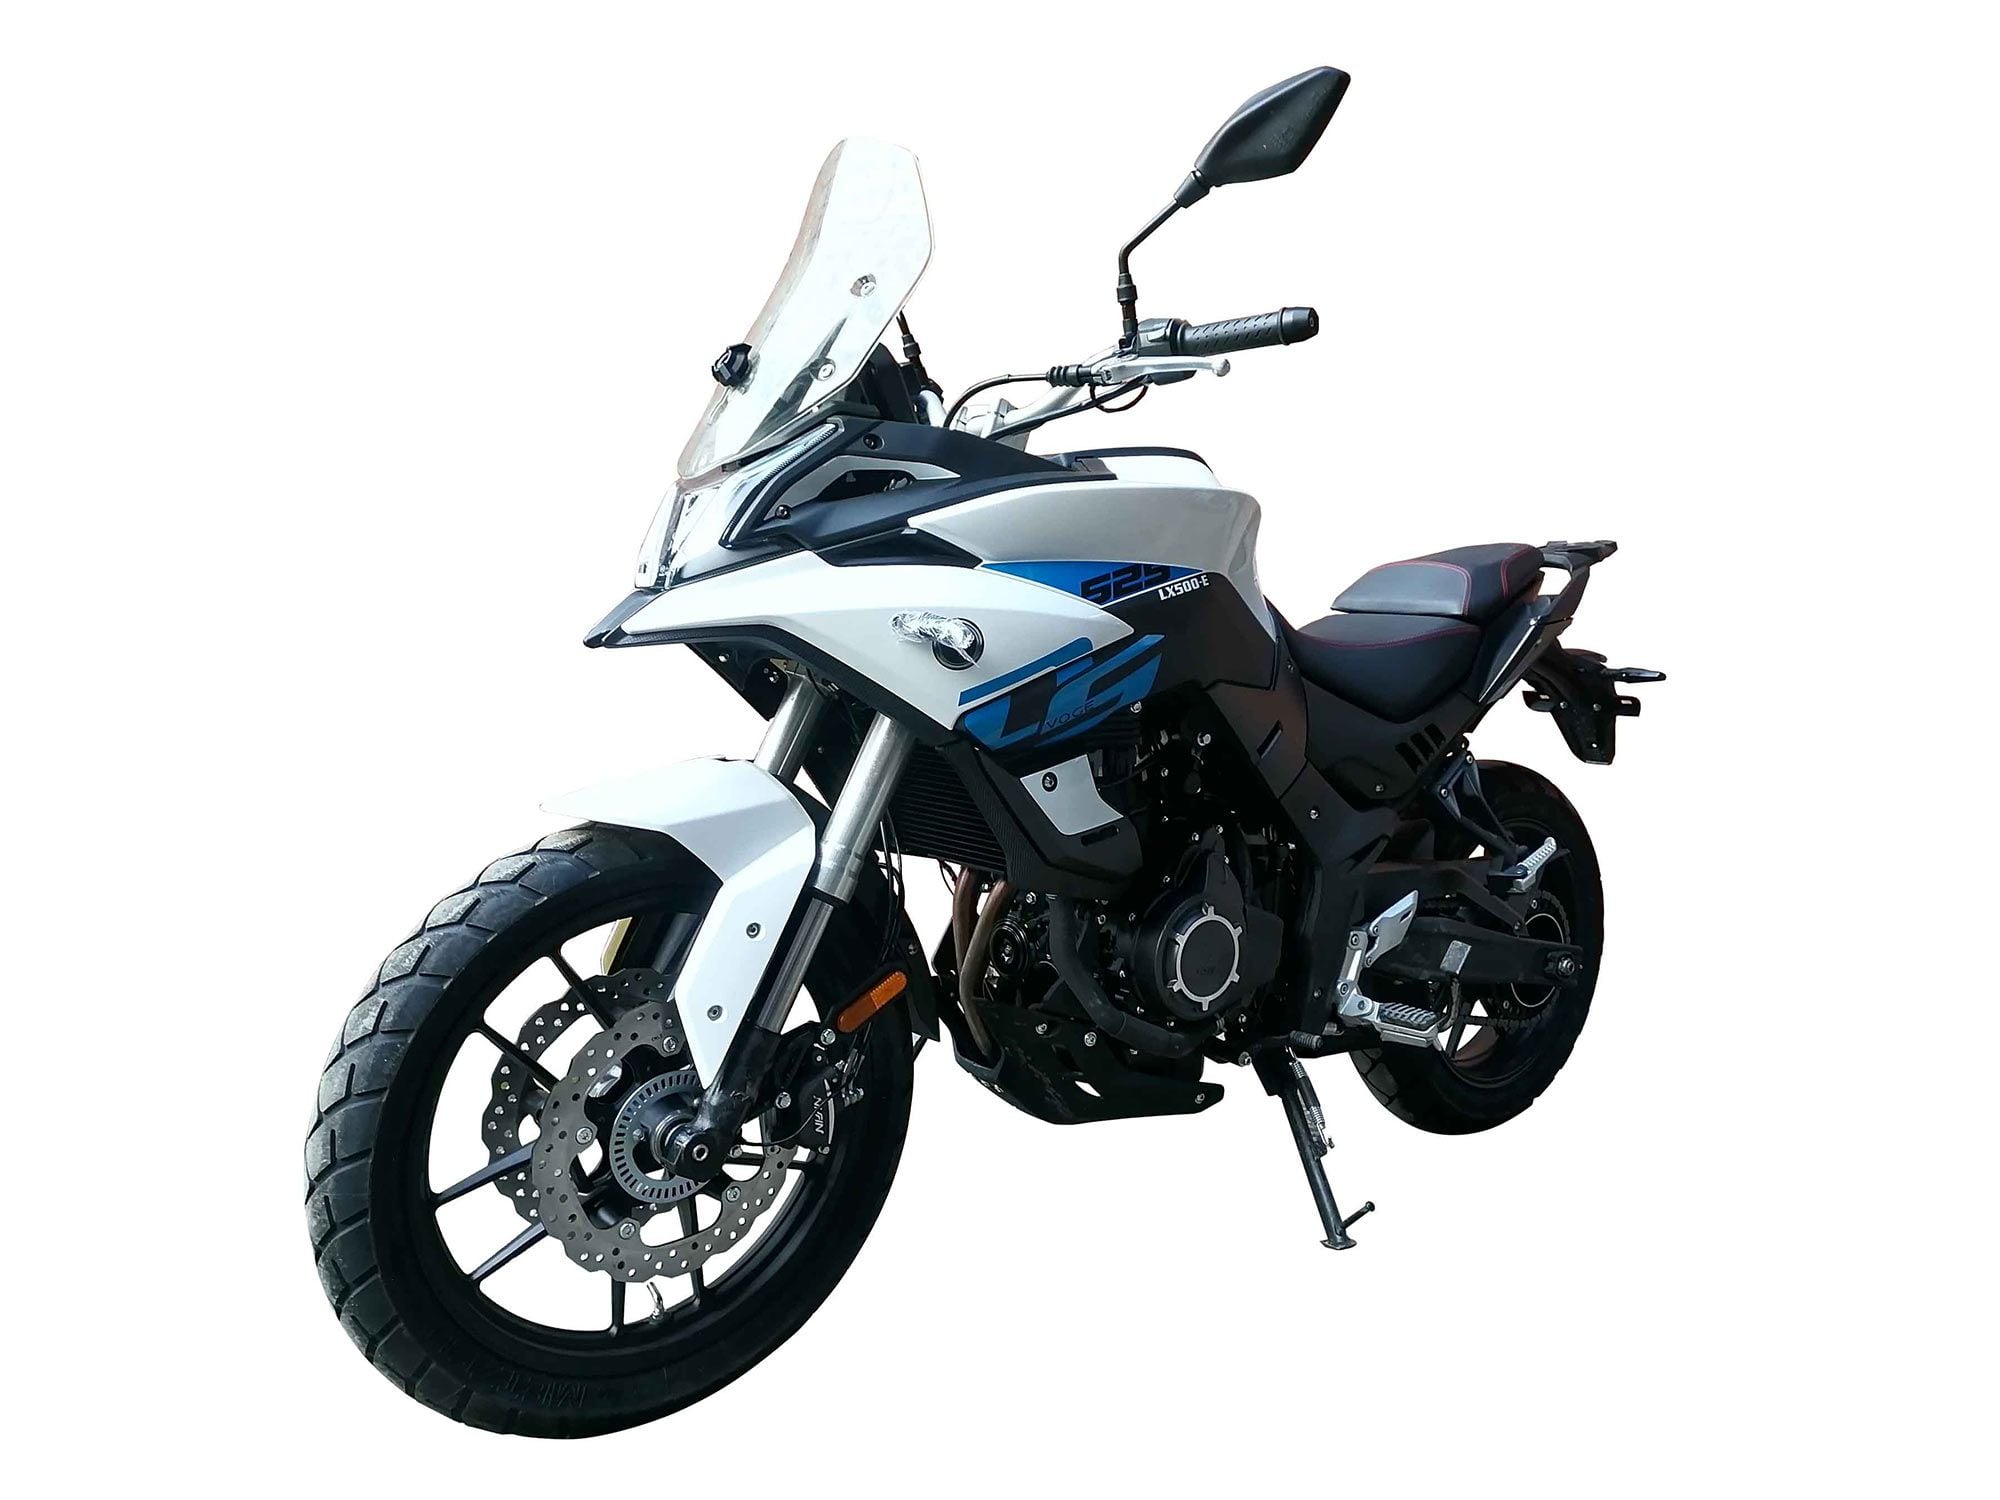 The updated Voge 525DS has a larger 494cc engine and taller front wheel, but retains its more road-going focus.